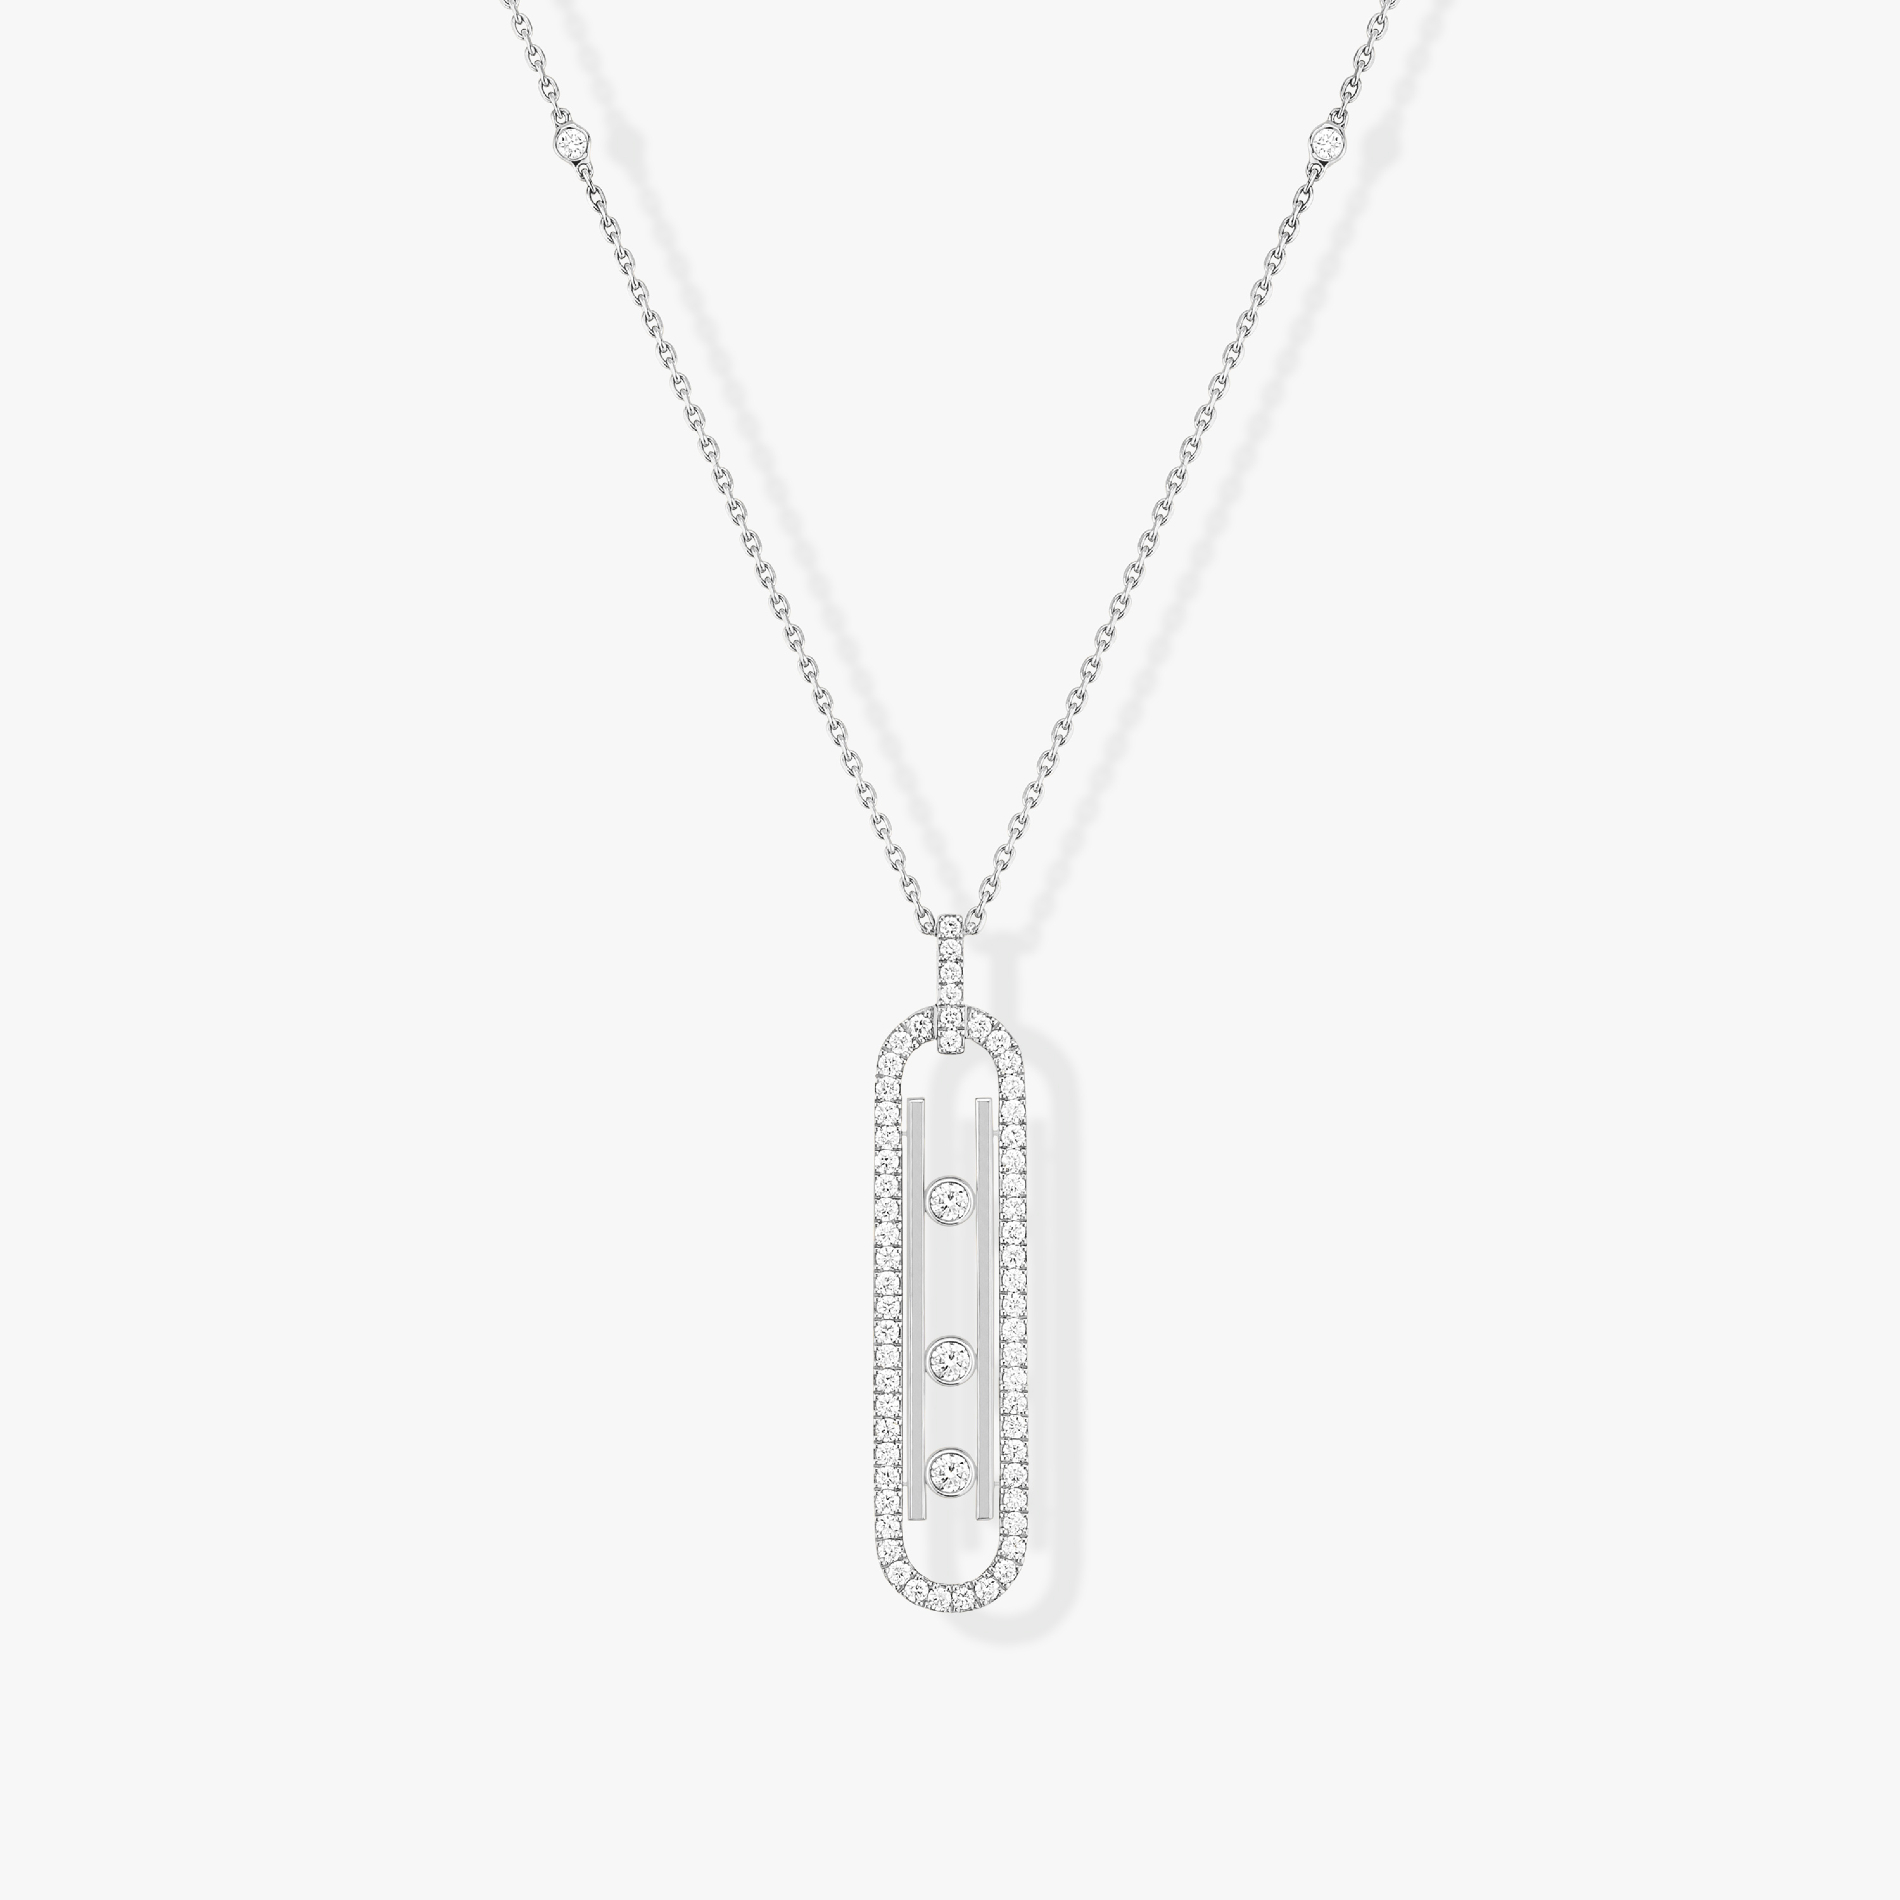 Move 10th SM Necklace White Gold For Her Diamond Necklace 10032-WG